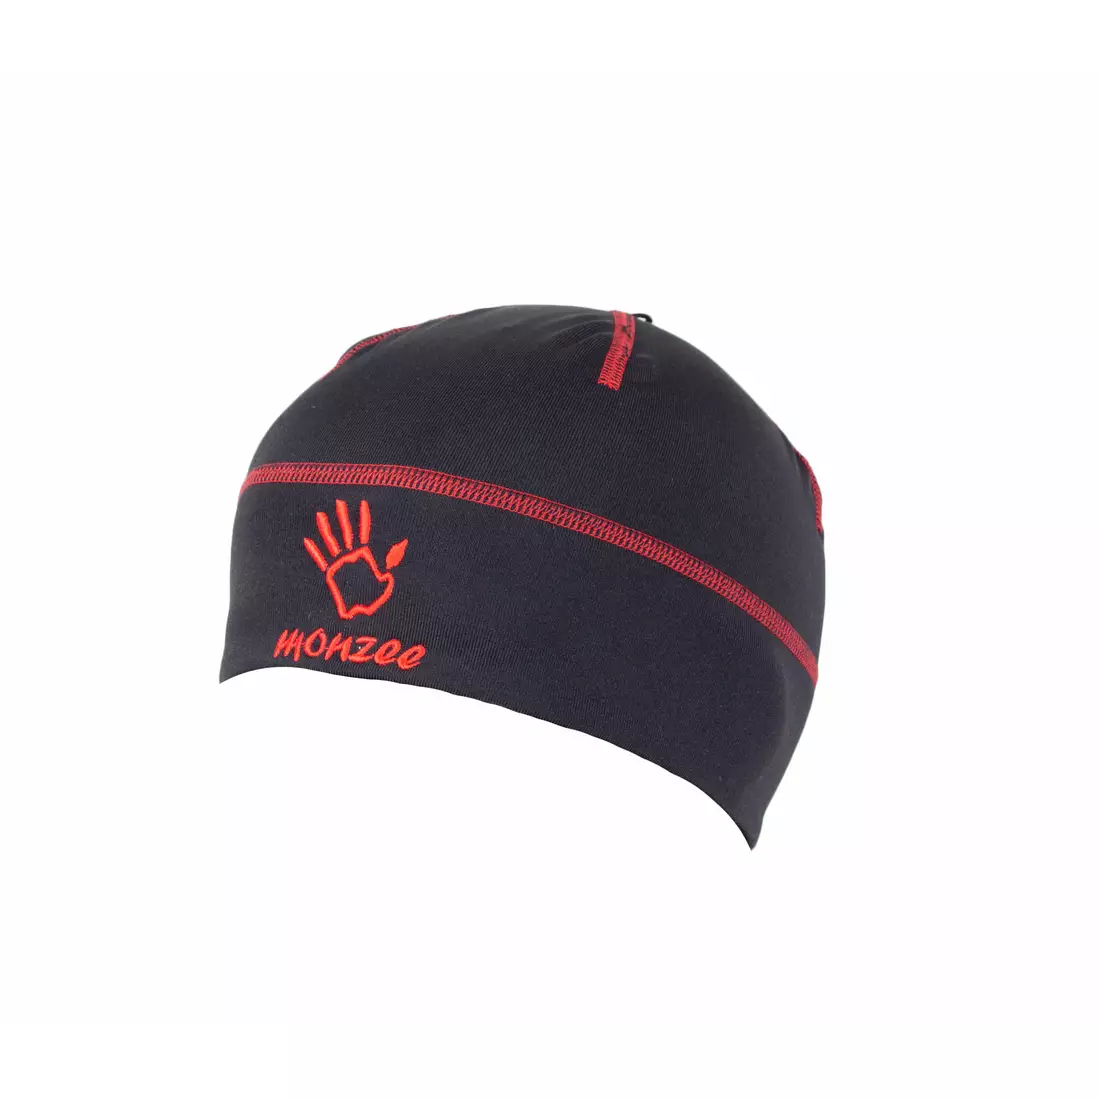 MONZEE - sports cap 14/01 A. black and red